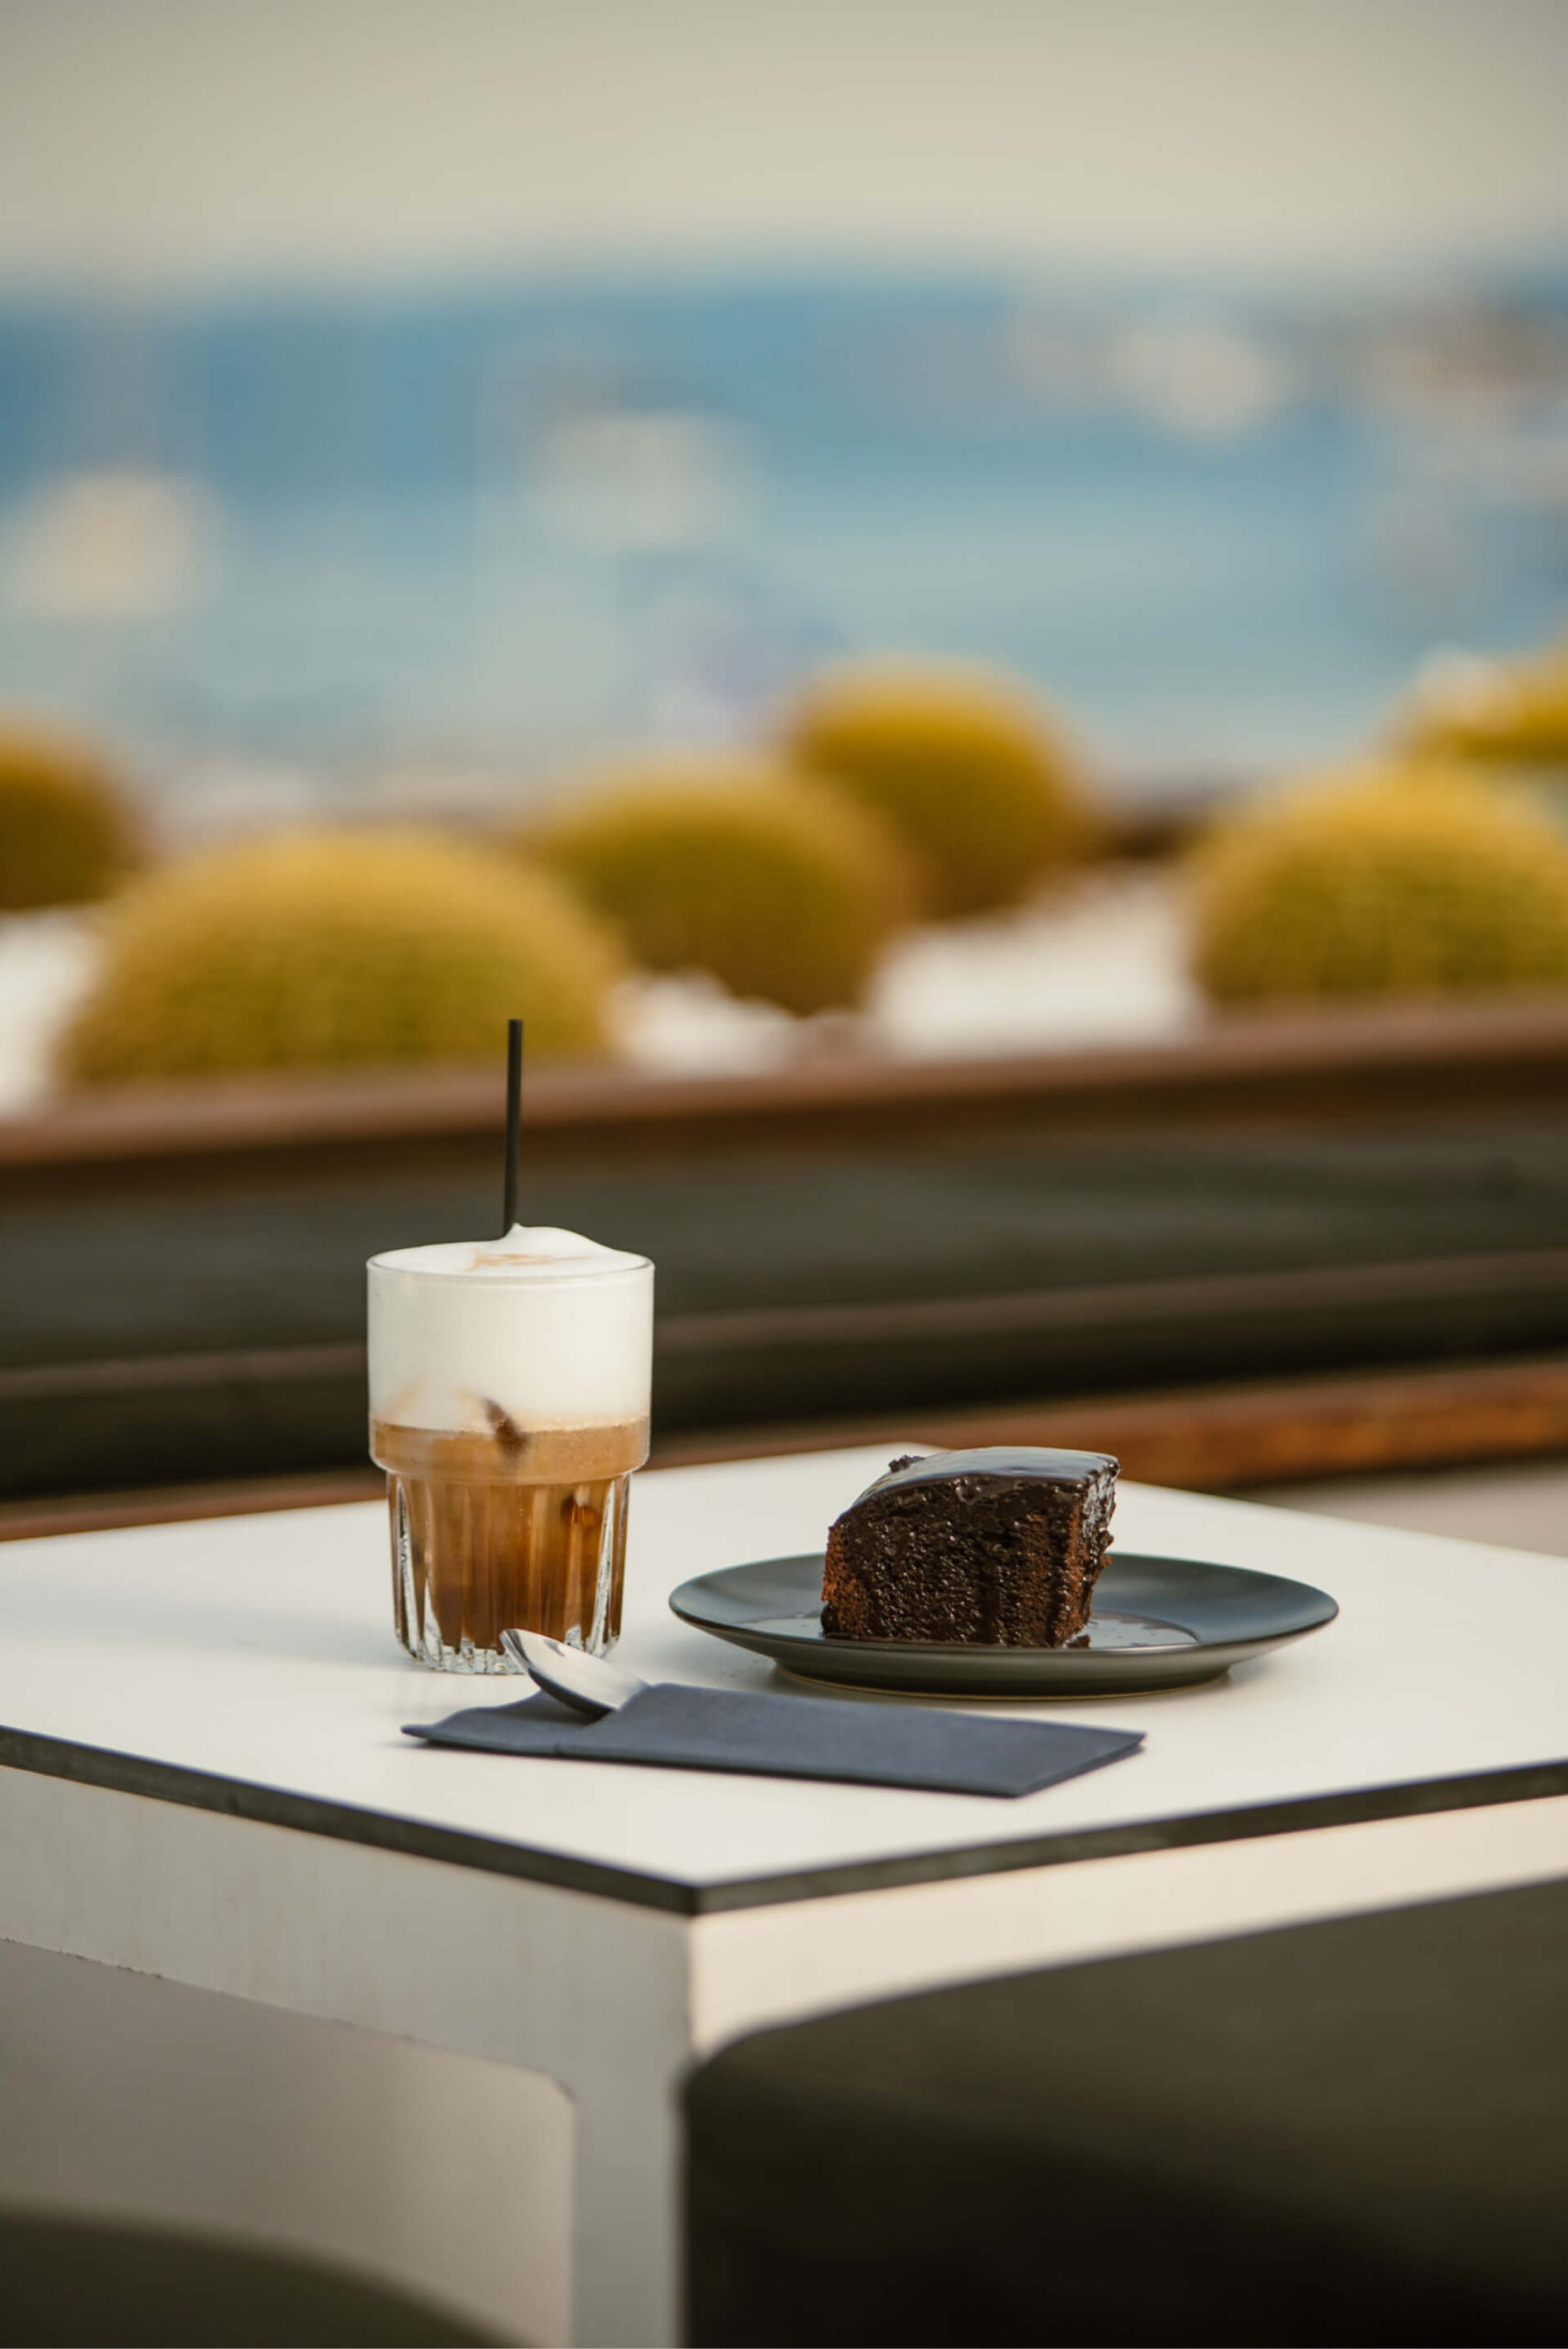 Table set with iced latte and chocolate cake, a tempting treat for indulgence